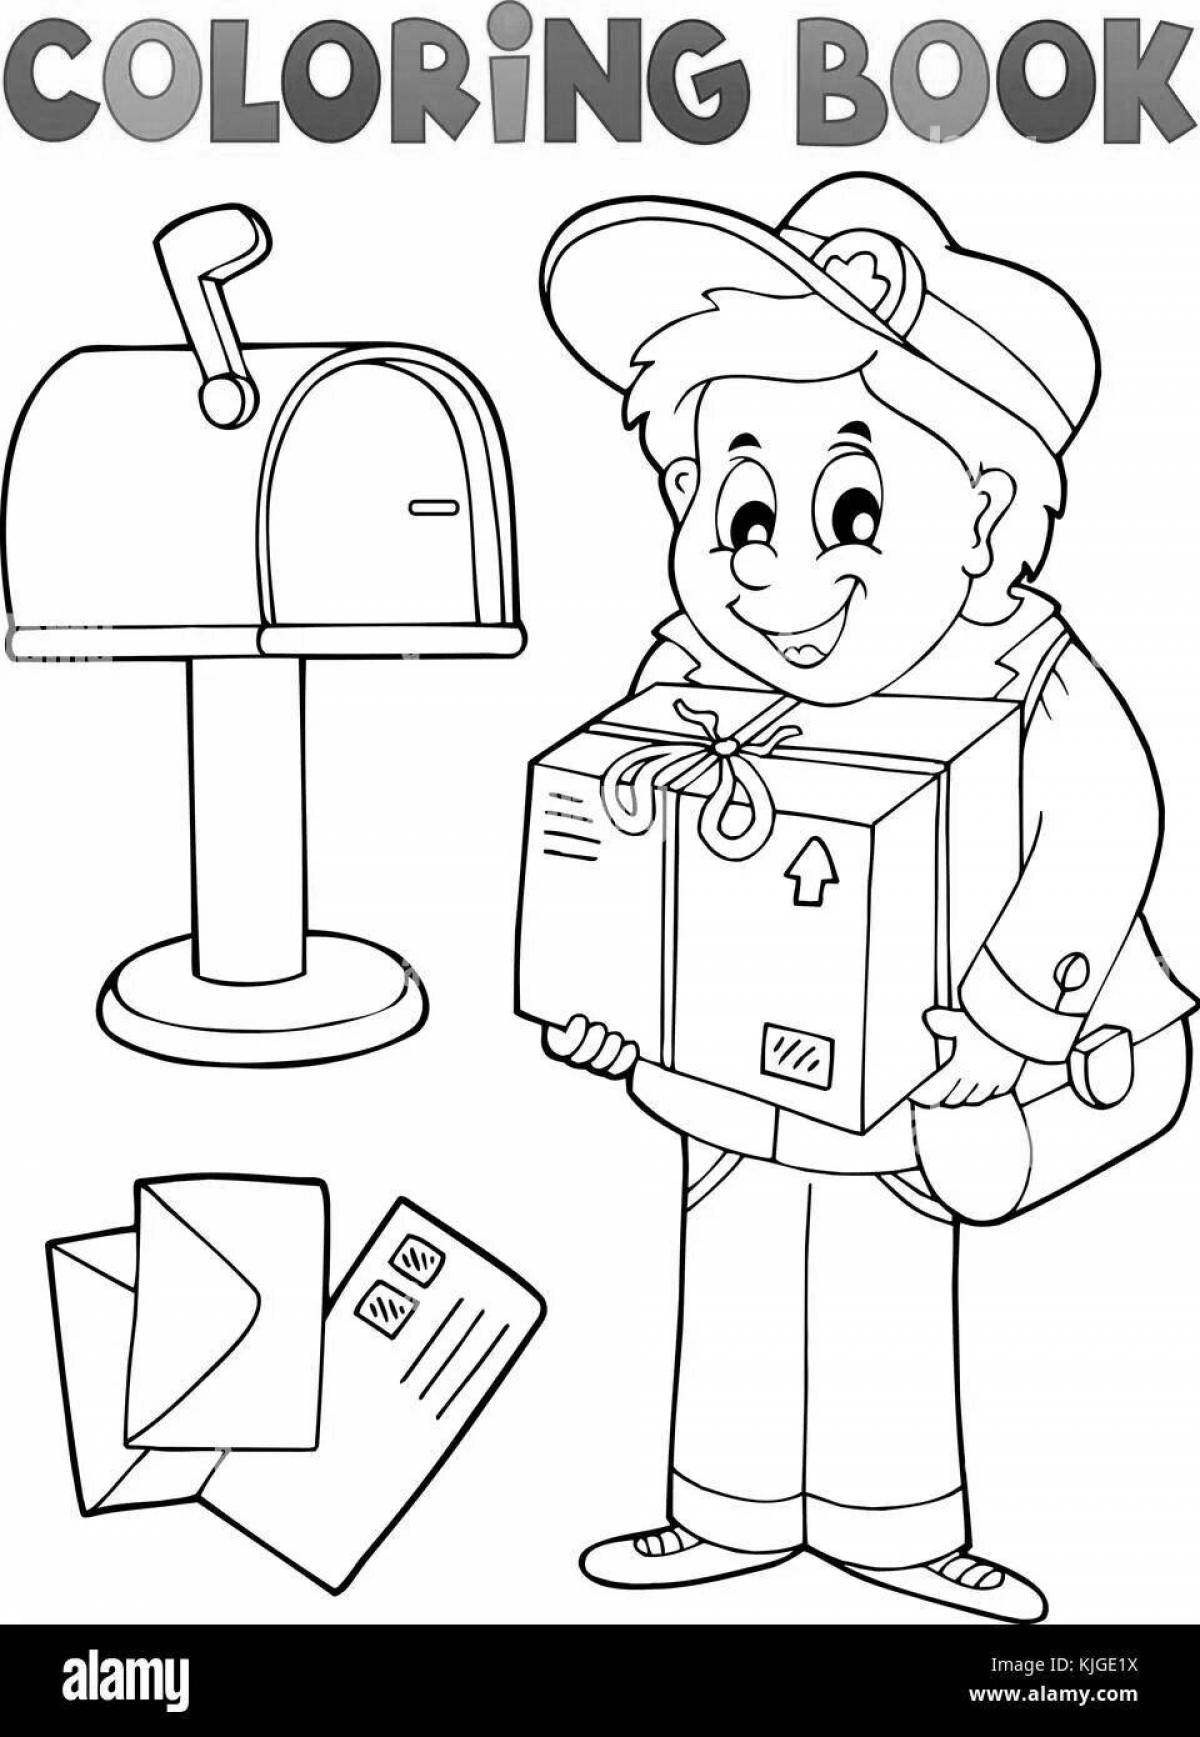 Creative mail coloring book for preschoolers